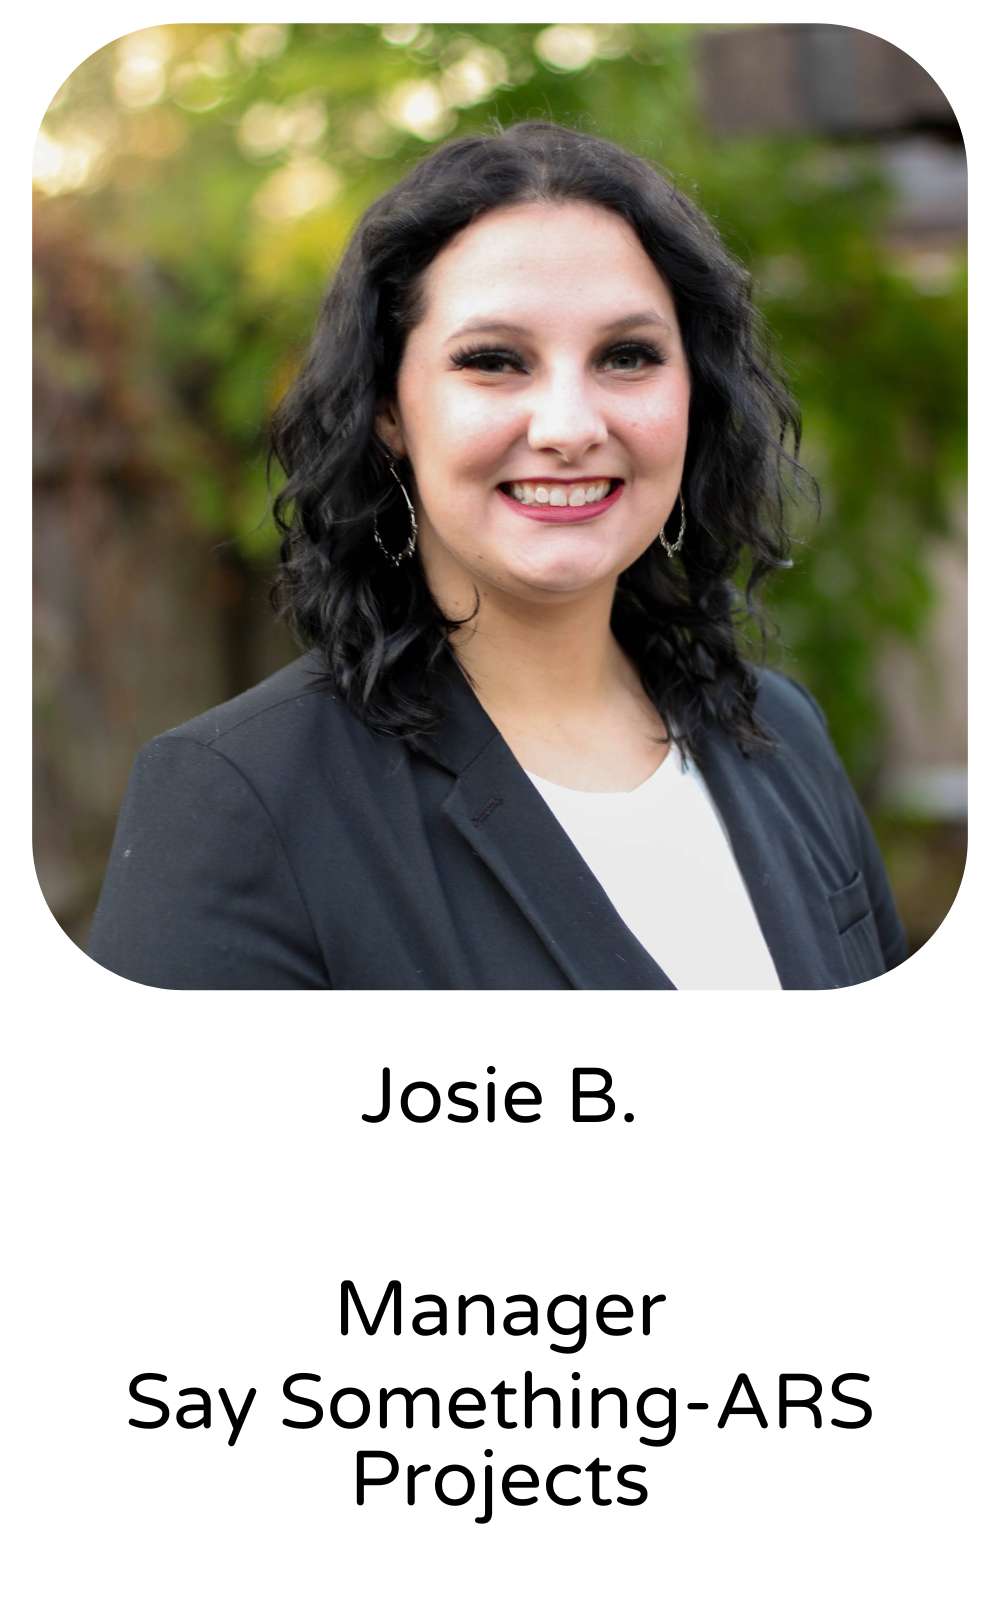 Josie B., Manager, Say Something-ARS Projects